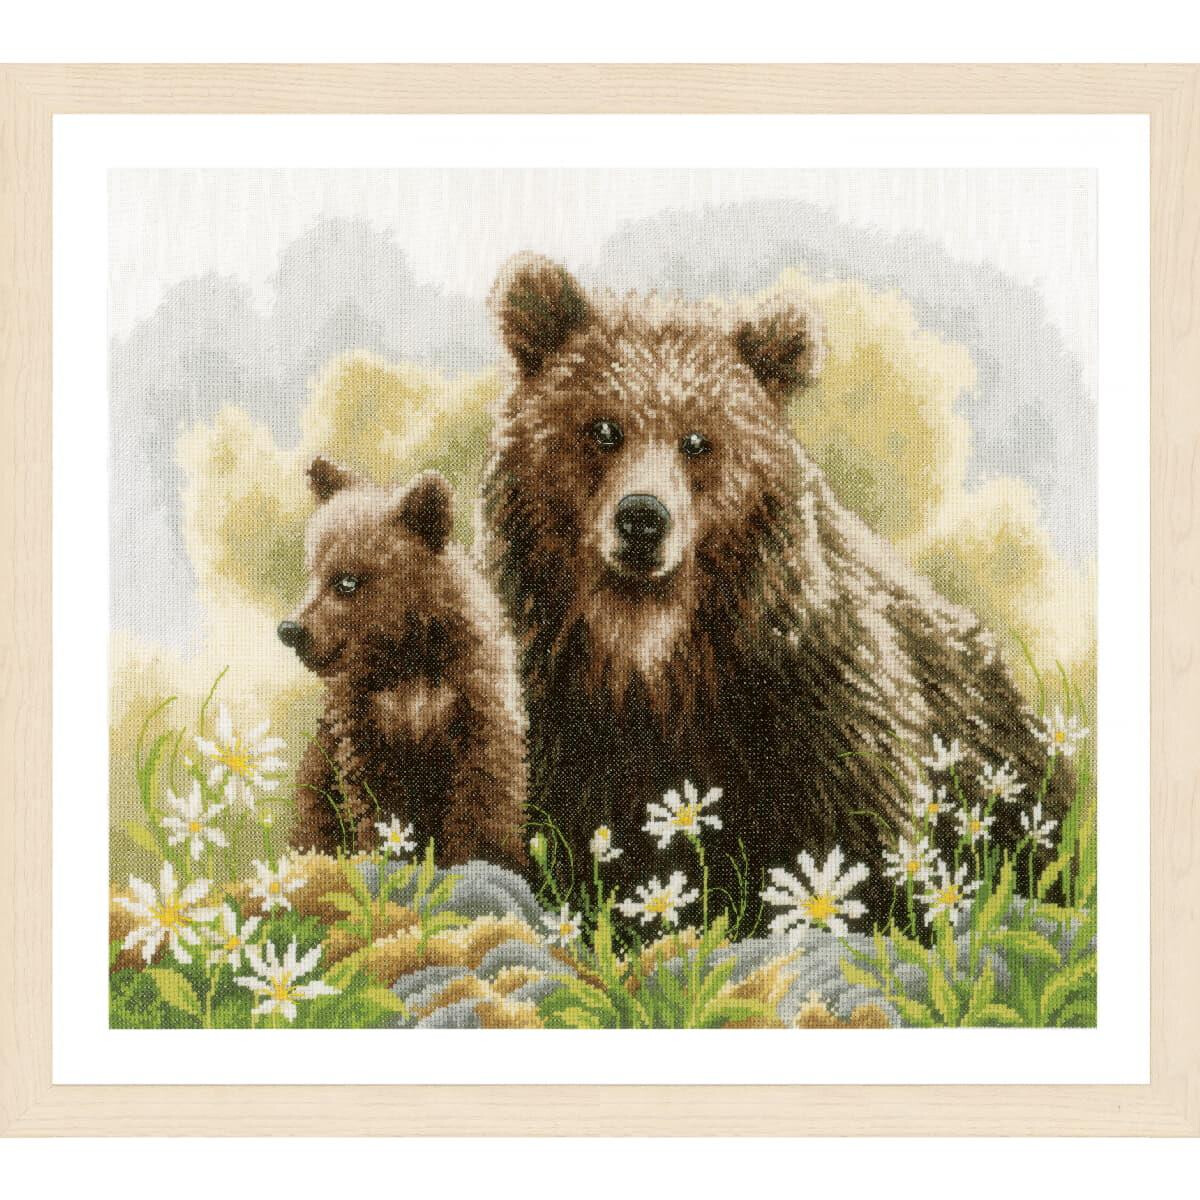 Lanarte counted cross stitch kit "Bears in the...